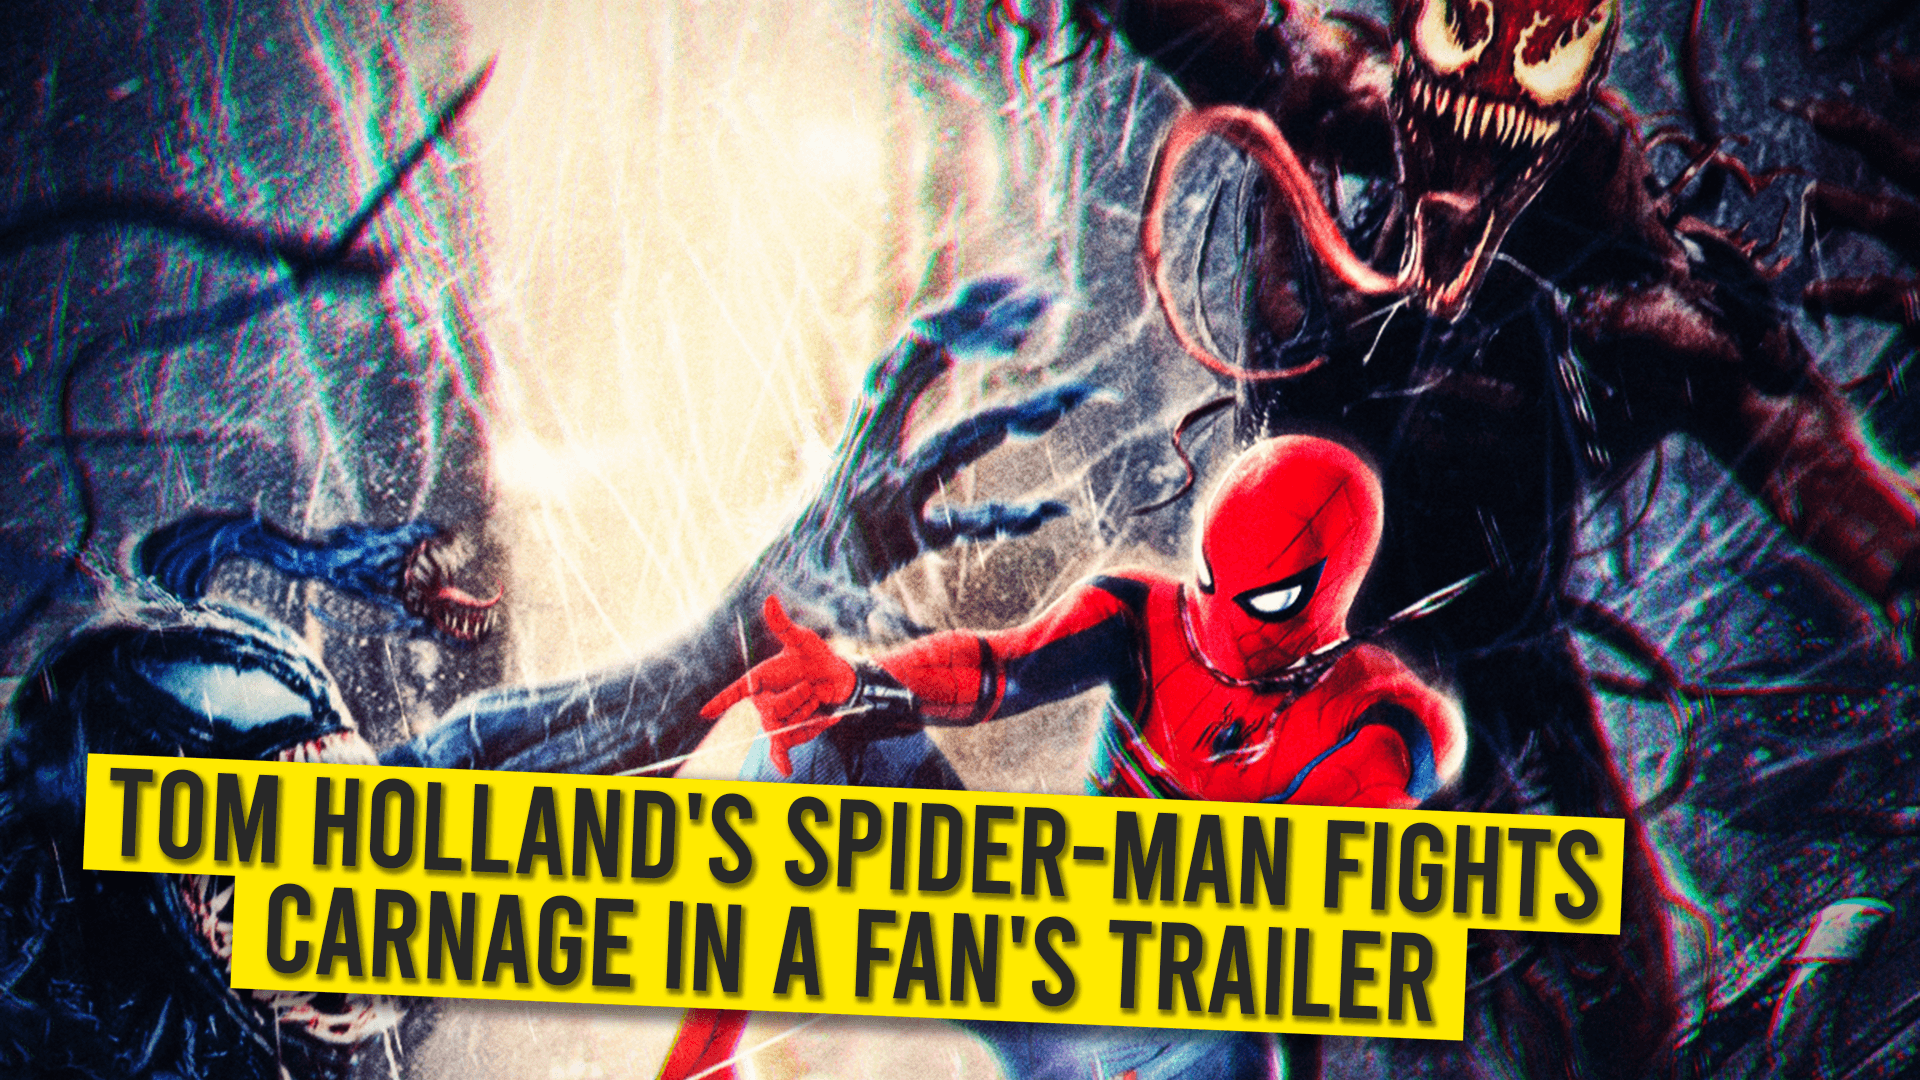 Tom Holland's Spider-Man Fights Carnage In A Fan's Trailer - Animated Times